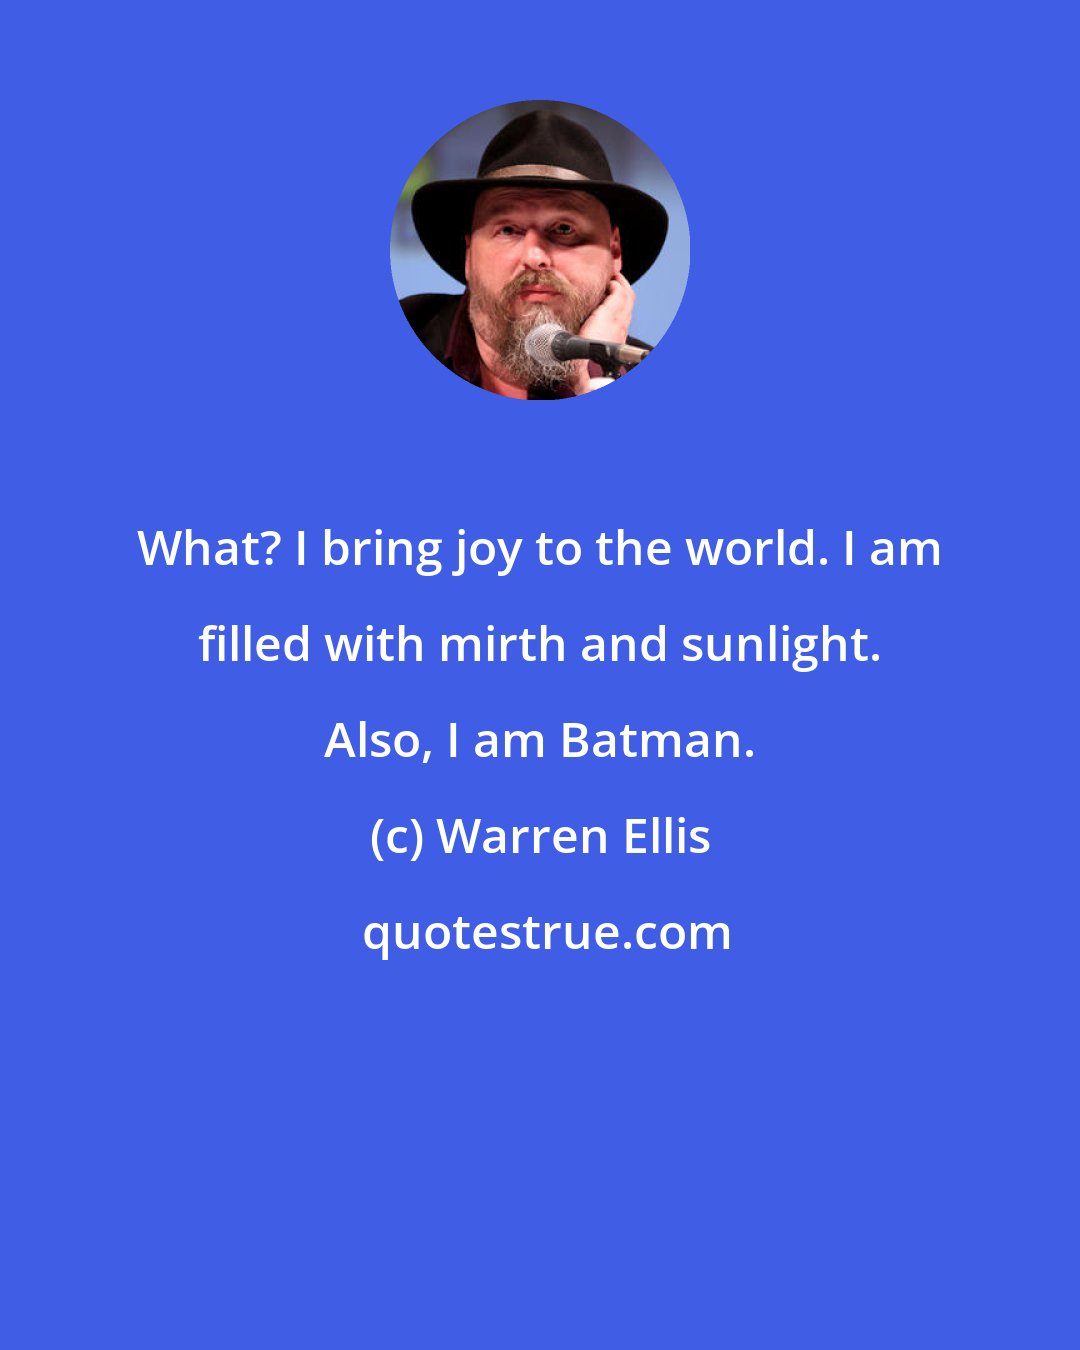 Warren Ellis: What? I bring joy to the world. I am filled with mirth and sunlight. Also, I am Batman.